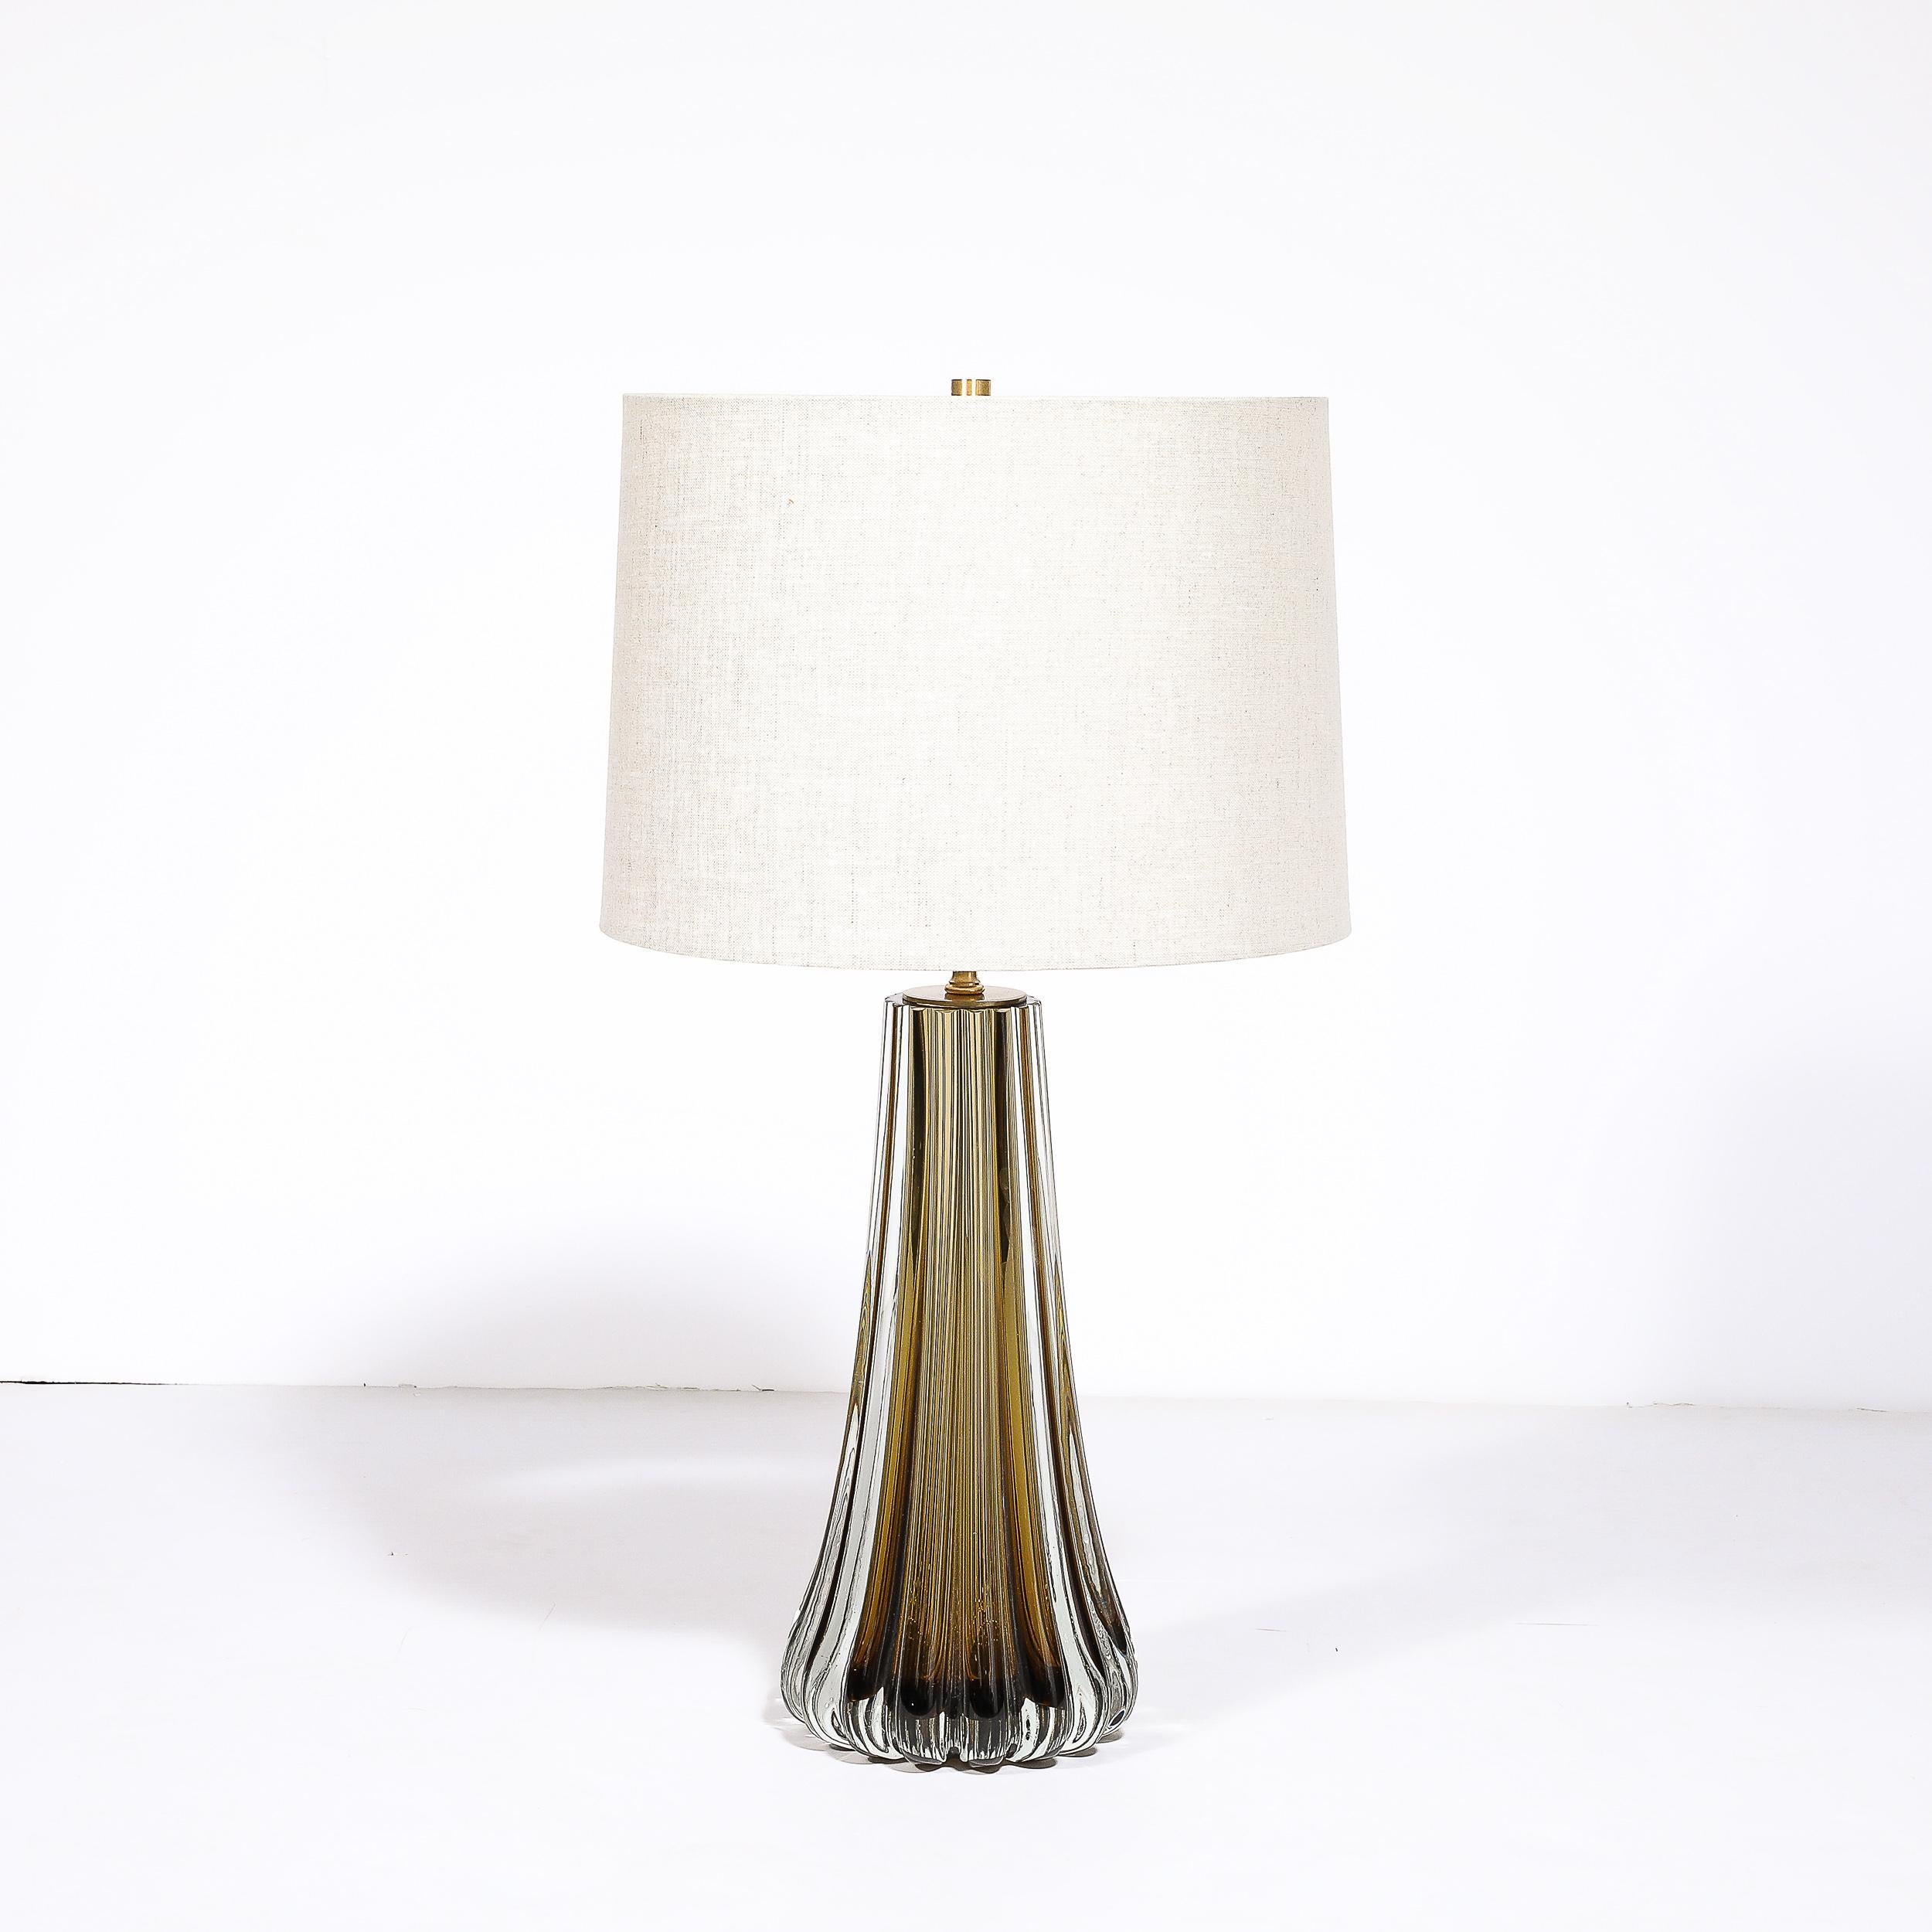 Italian Modernist Hand-Blown Fluted Smoked Topaz Murano Glass & Brass Table Lamps